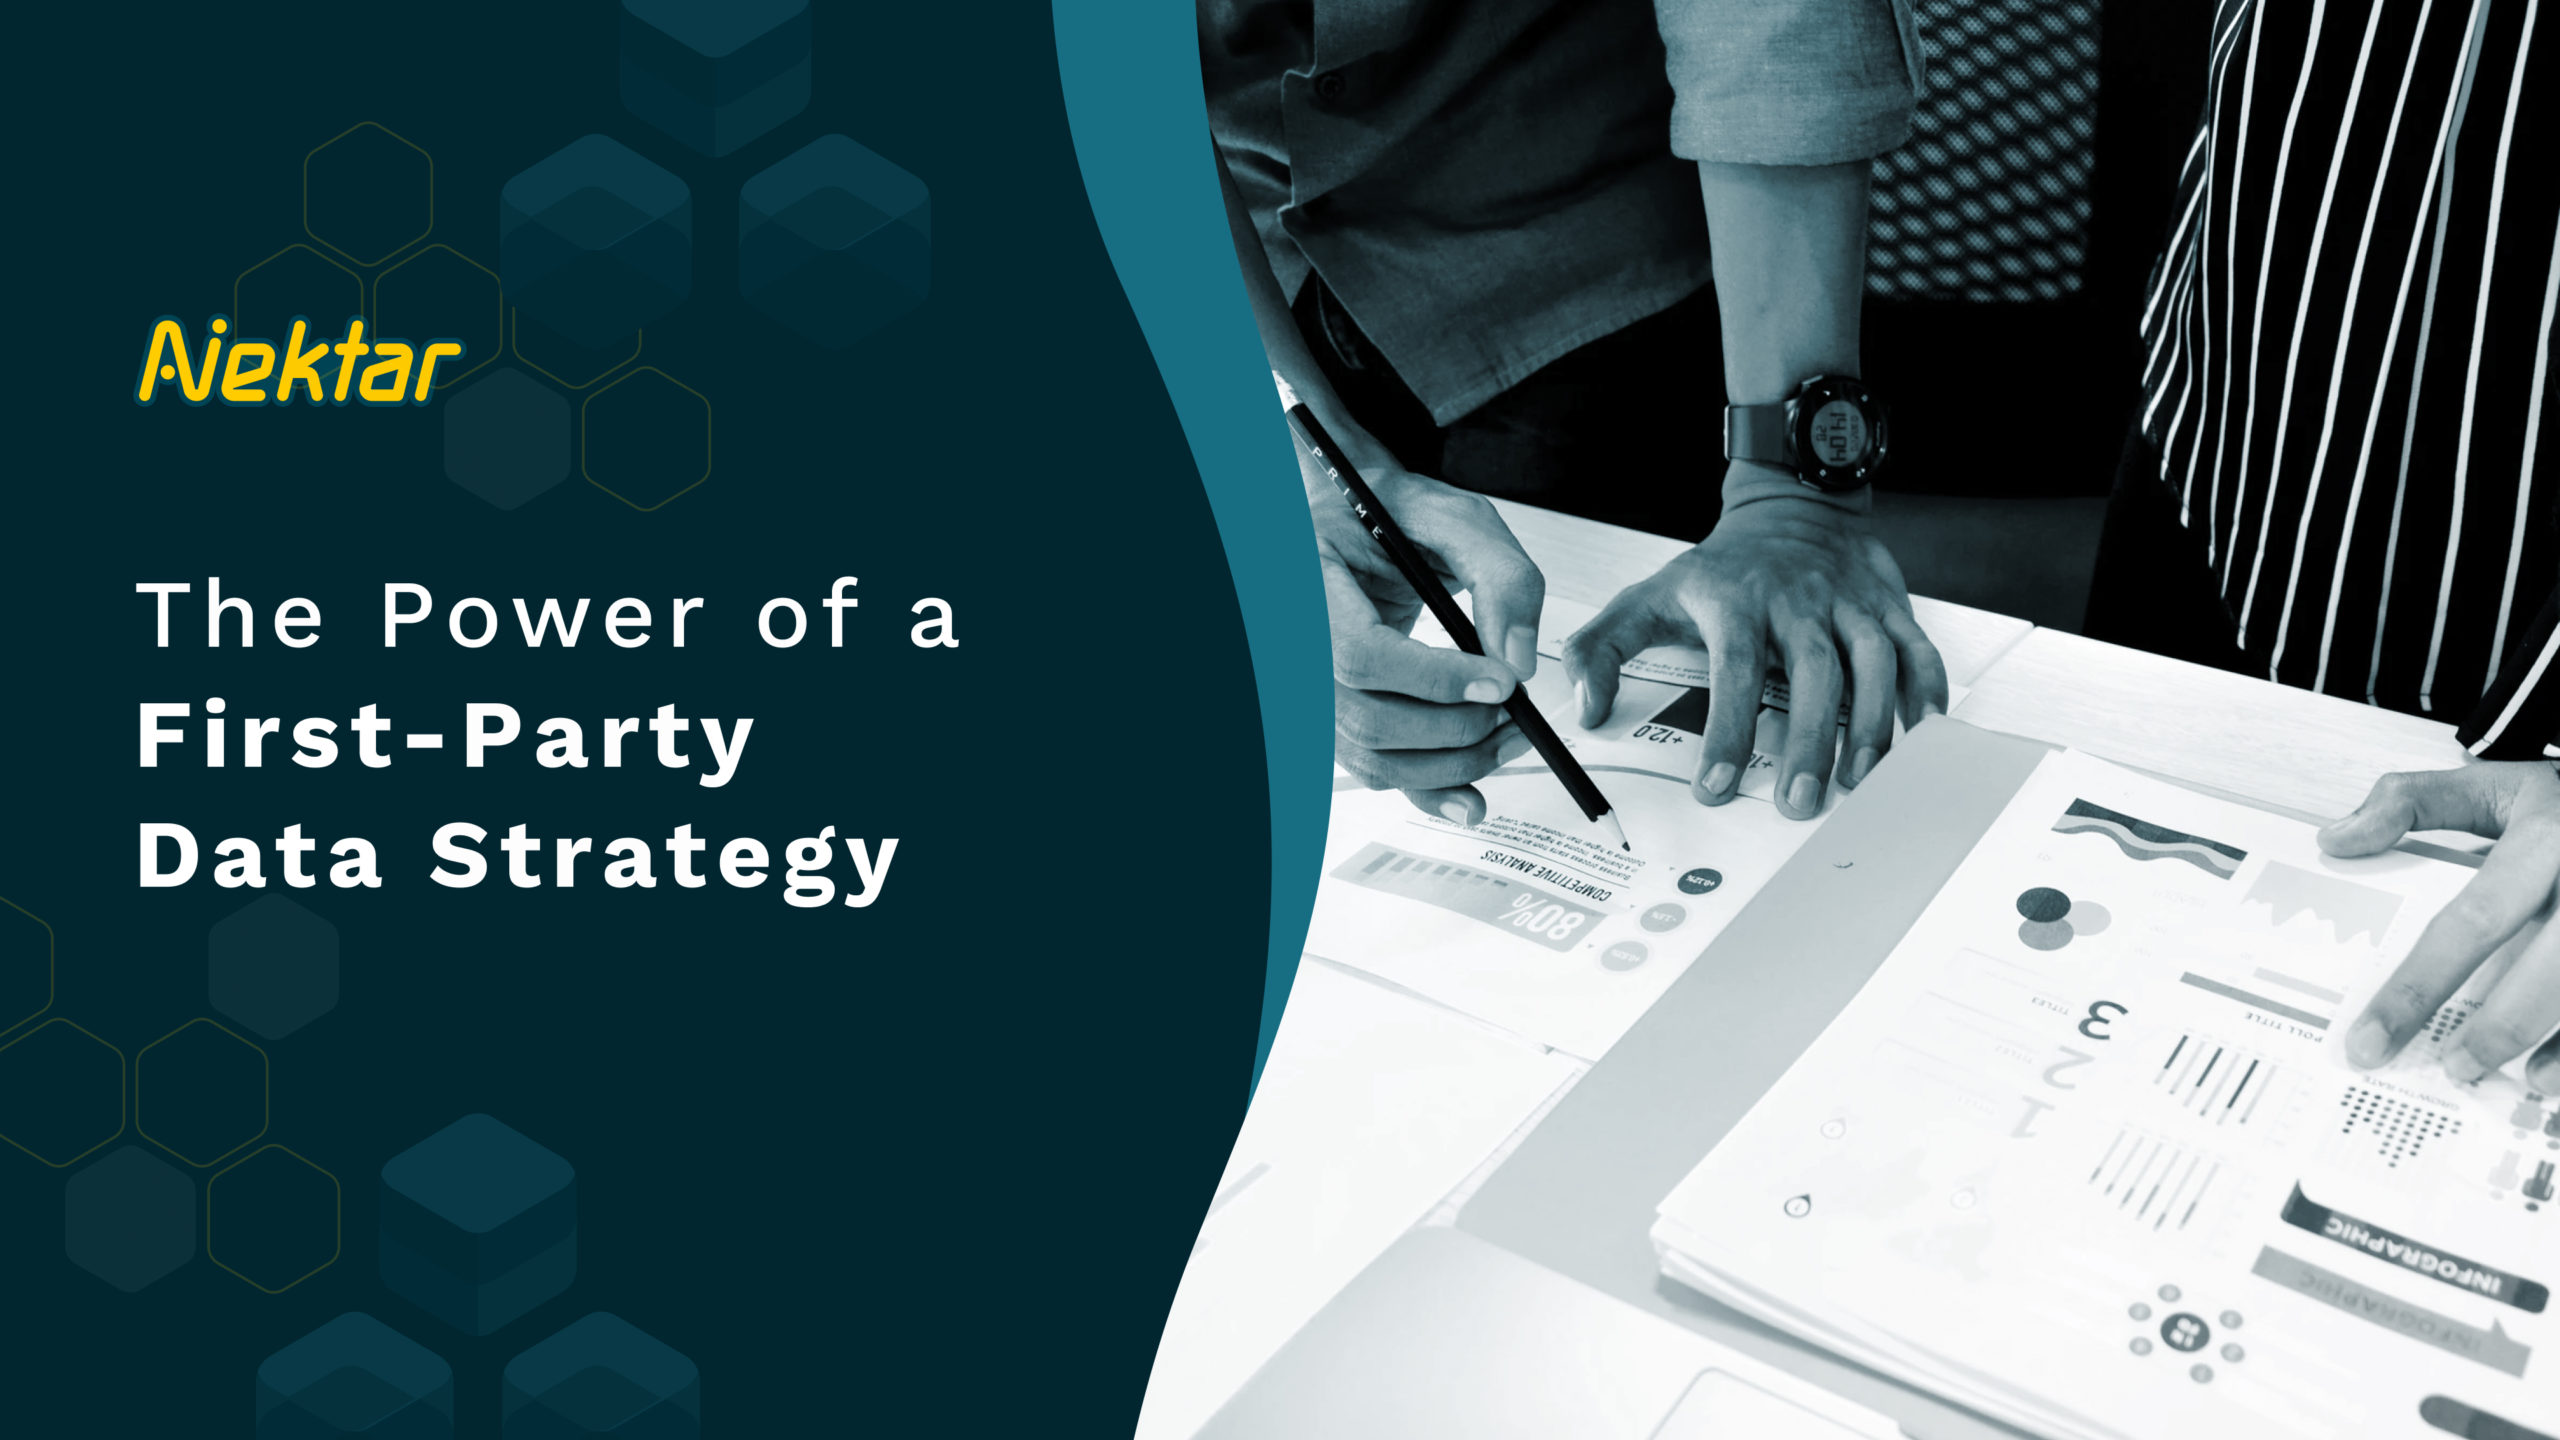 The Power of a First-Party Data Strategy